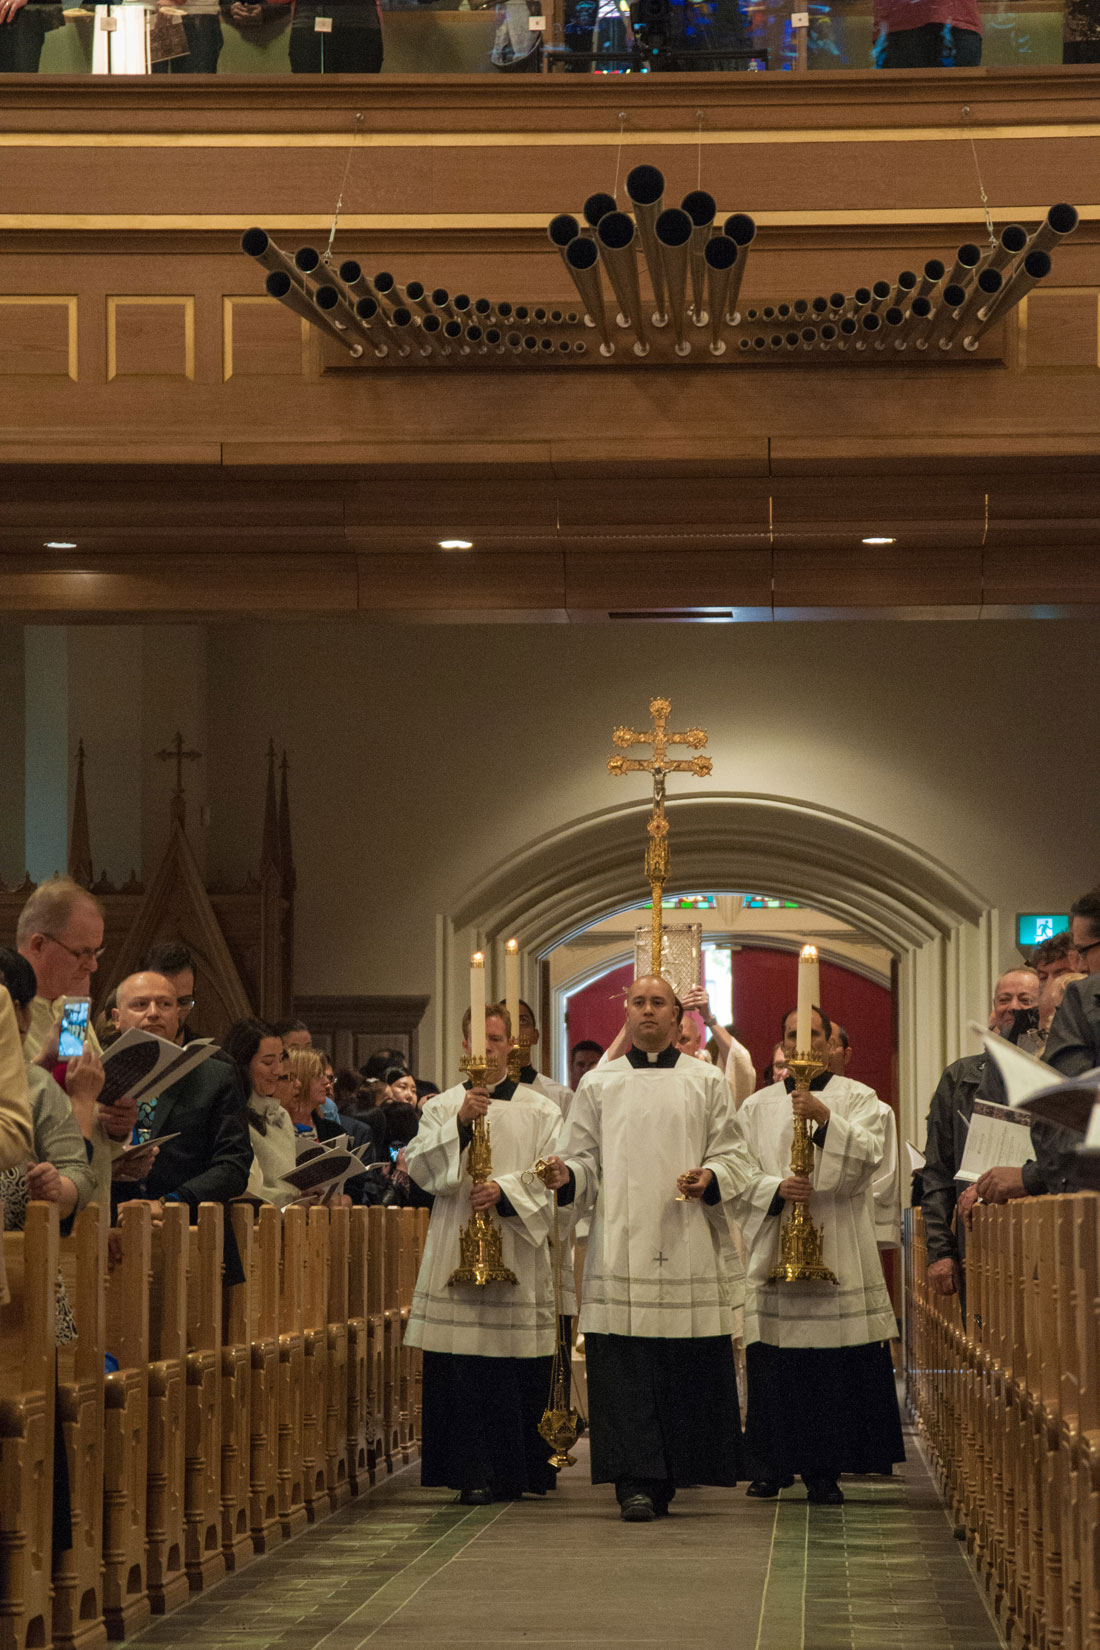 The workers’ thanksgiving Mass at St. Michael’s Cathedral Sept. 30. (Photo by Michael Swan)